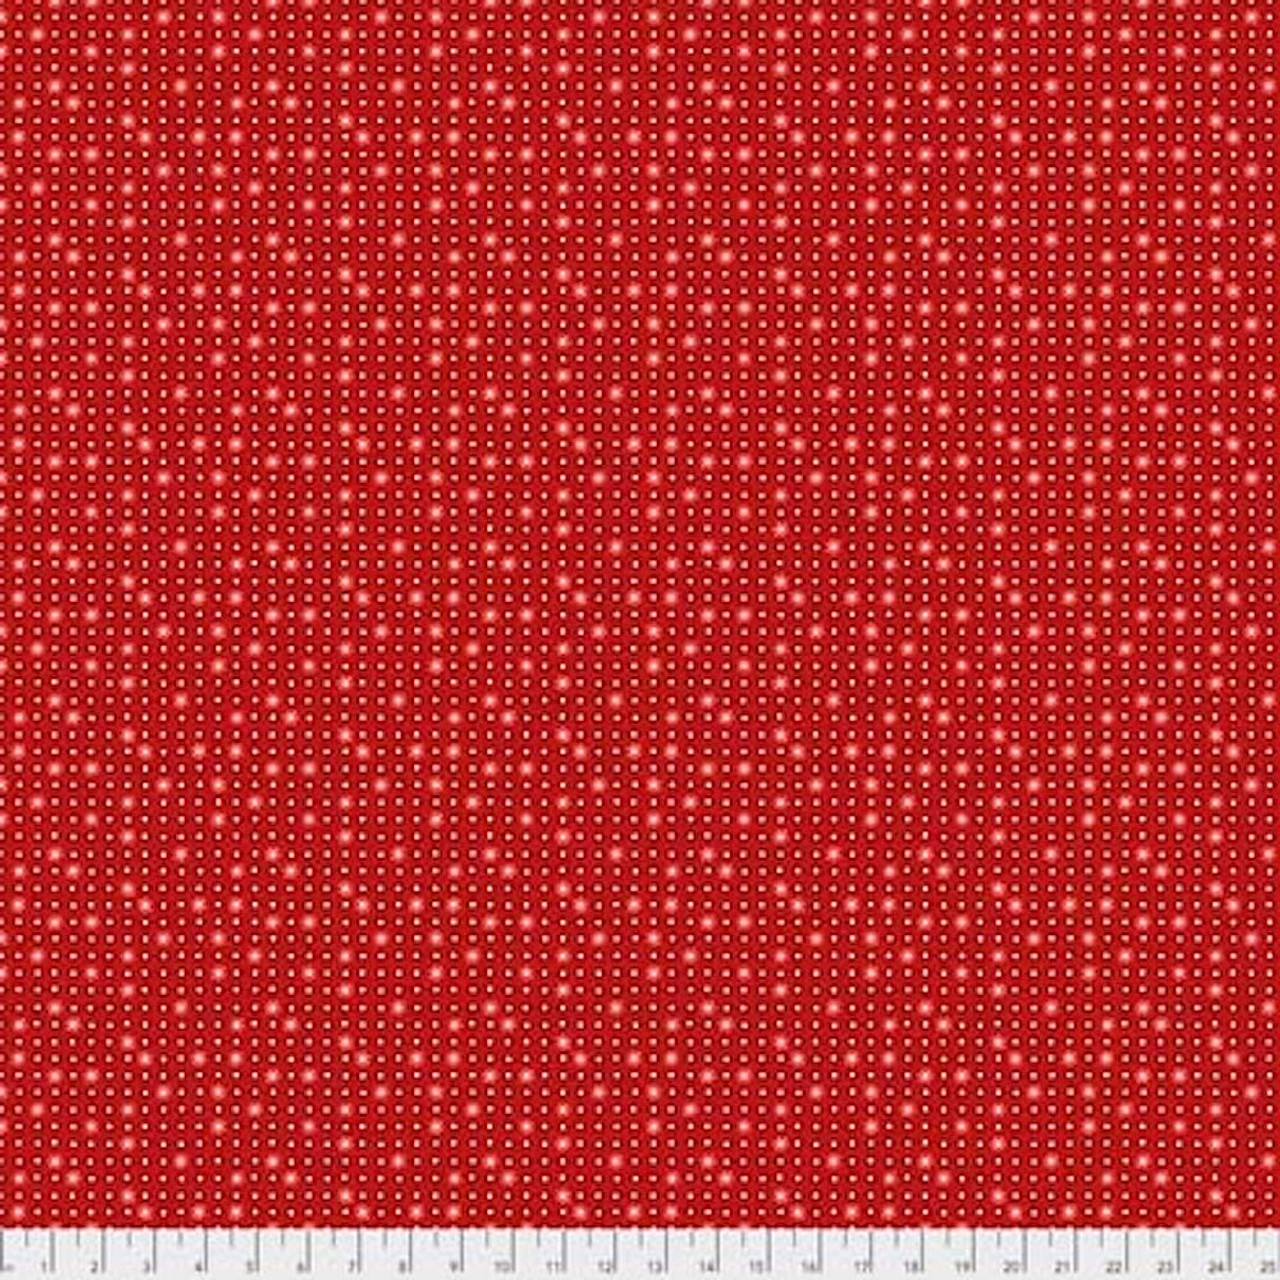 Coats PWCC013 Daisy Daze Daisies Red Cotton Quilting Fabric By Yd